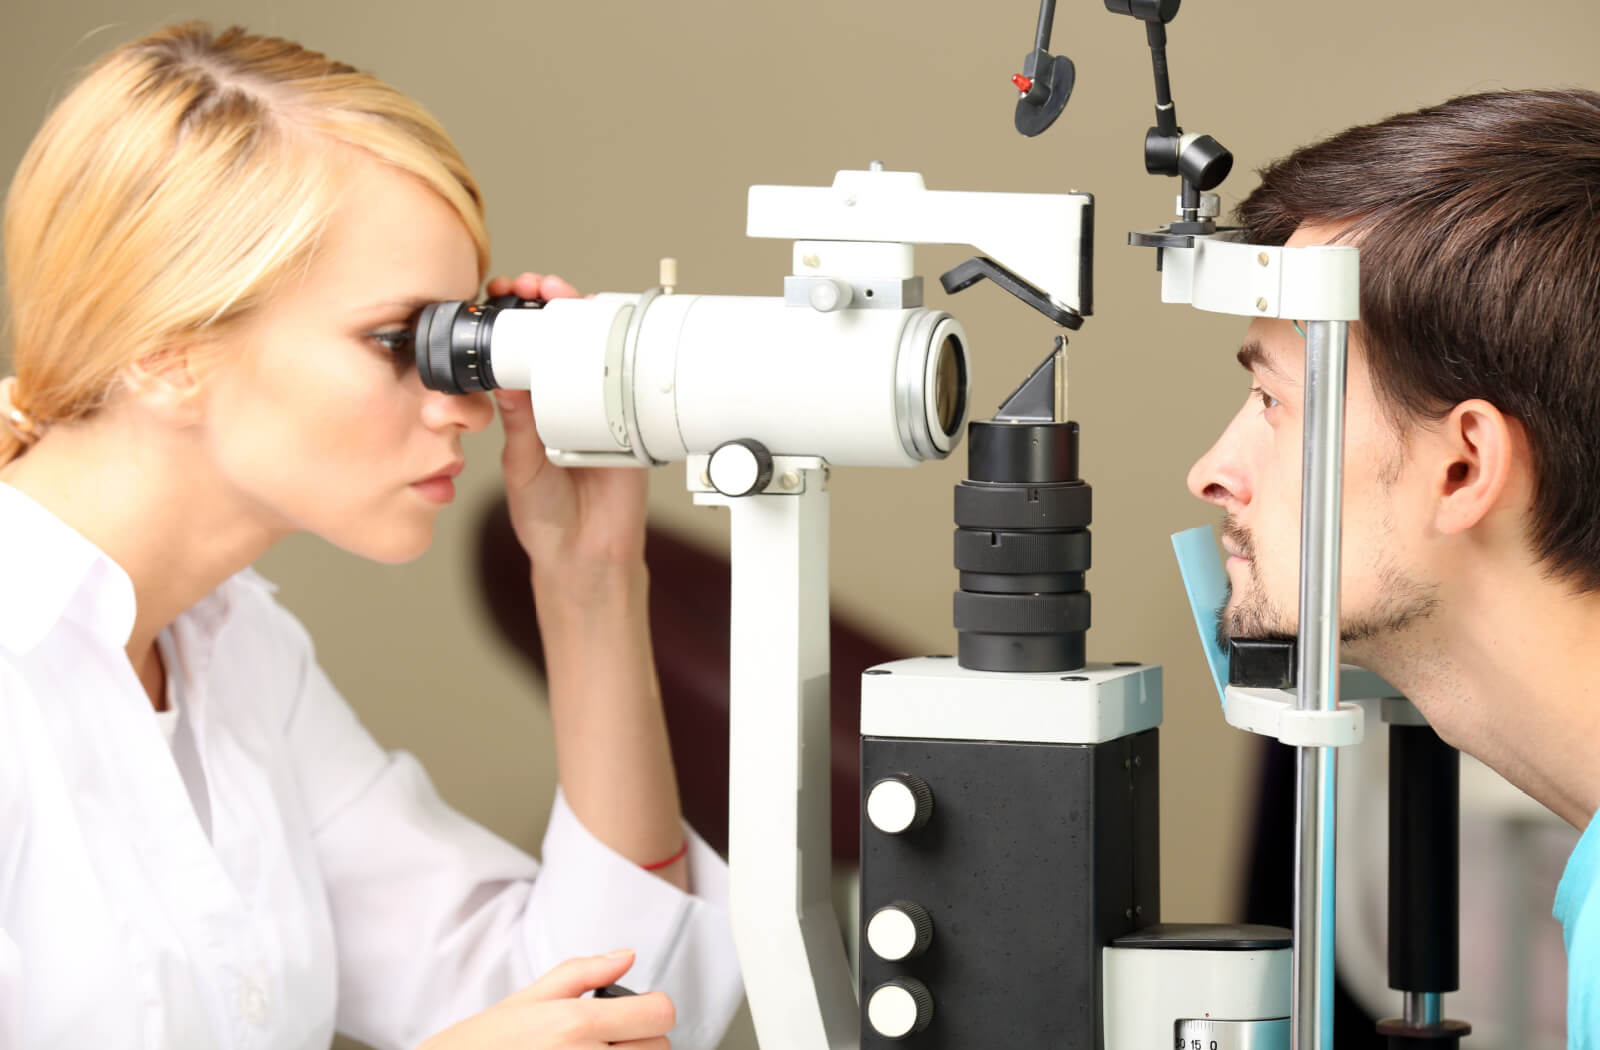 A female optometrist examining the eyes of a man using a medical device to detect potential eye problems.